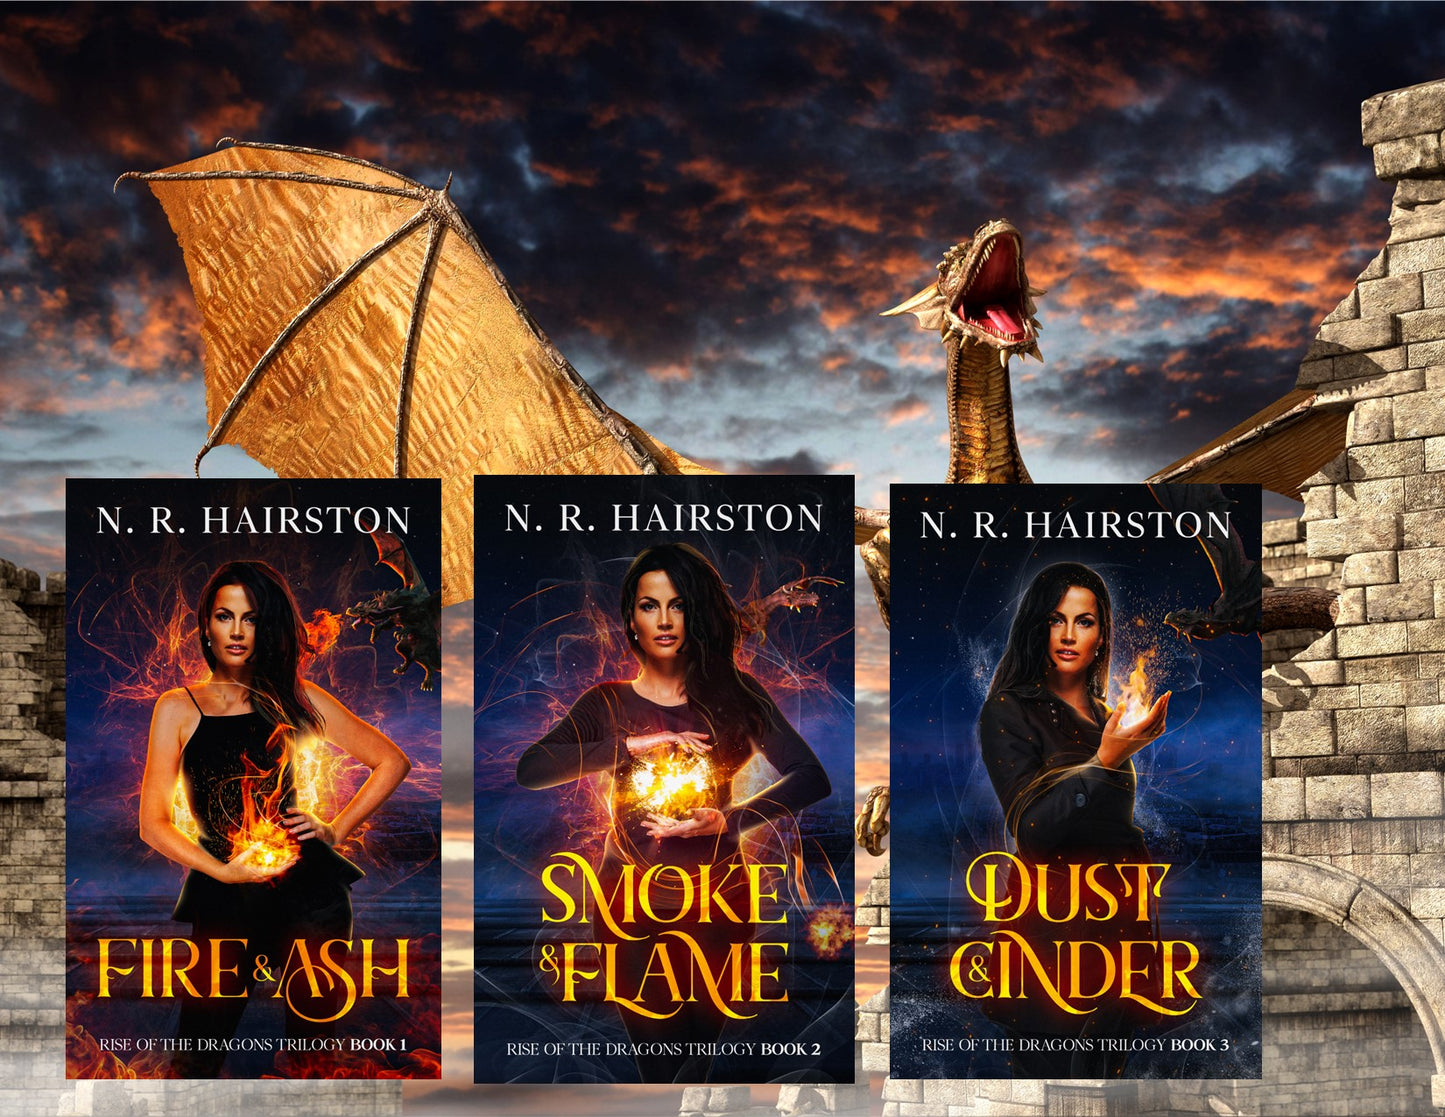 Fire and Ash (Rise of the Dragons Trilogy Book 1)